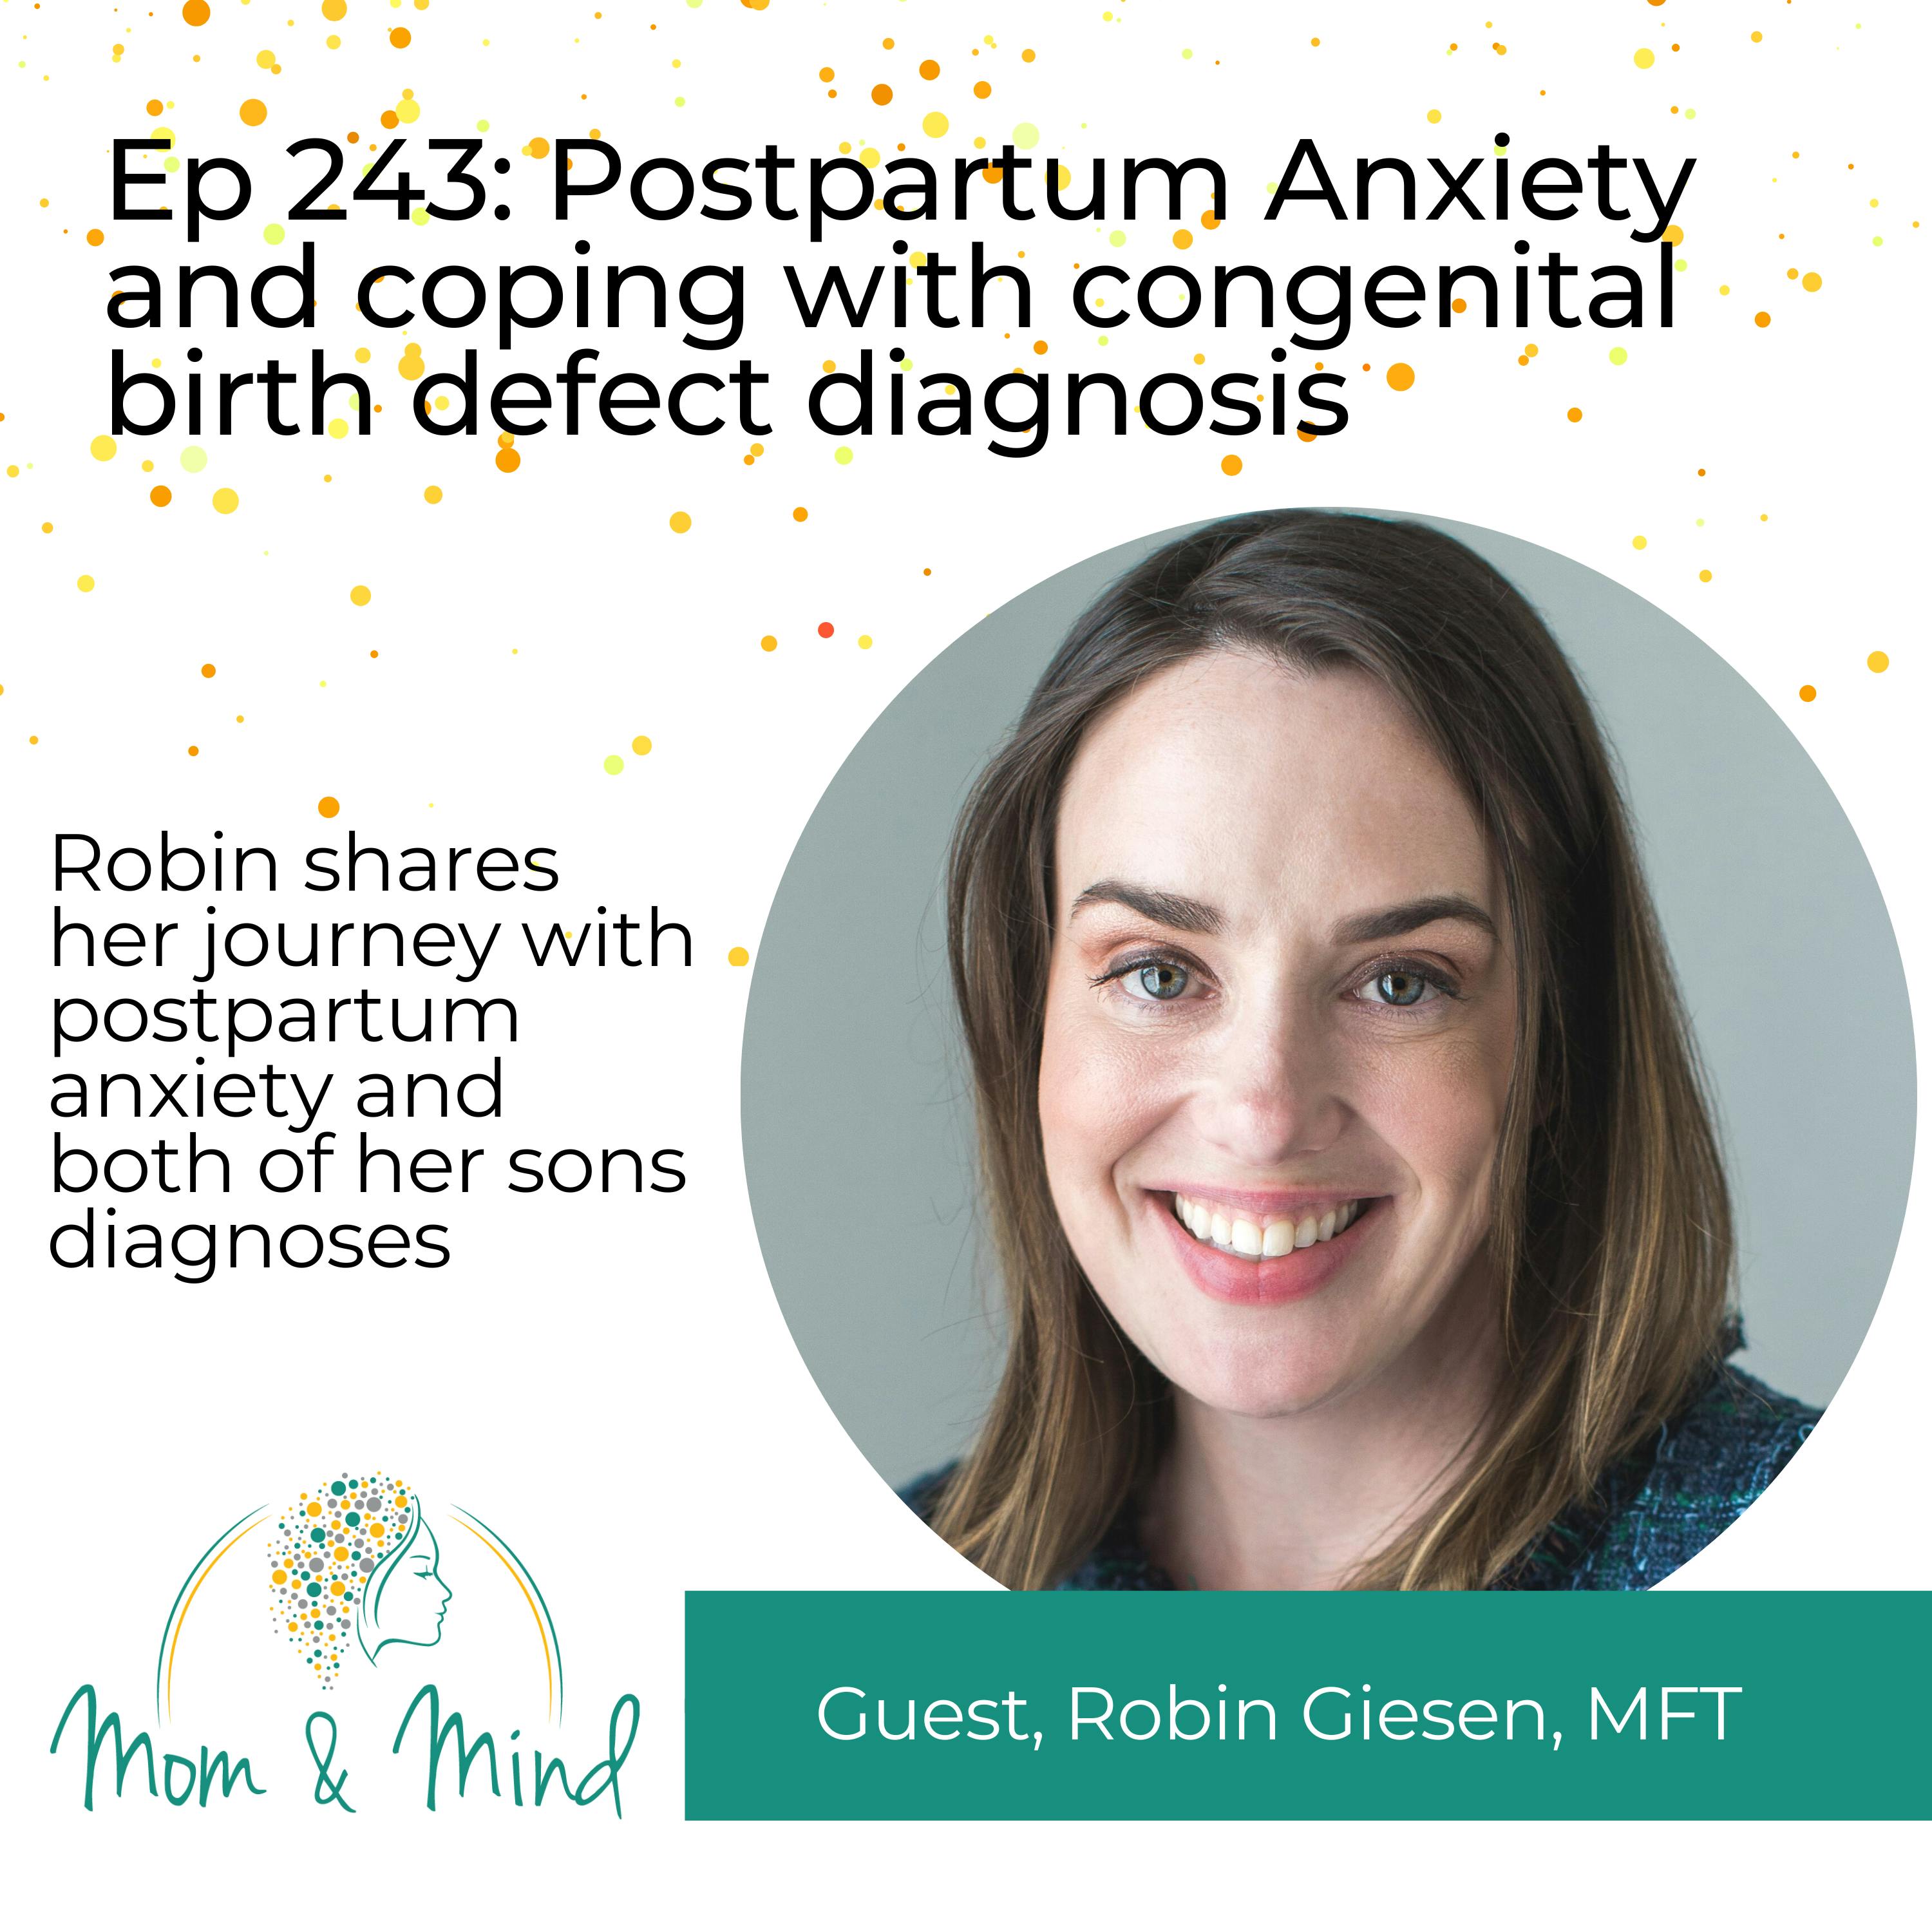 243: Postpartum Anxiety and Coping with Congenital Birth Defects Diagnosis